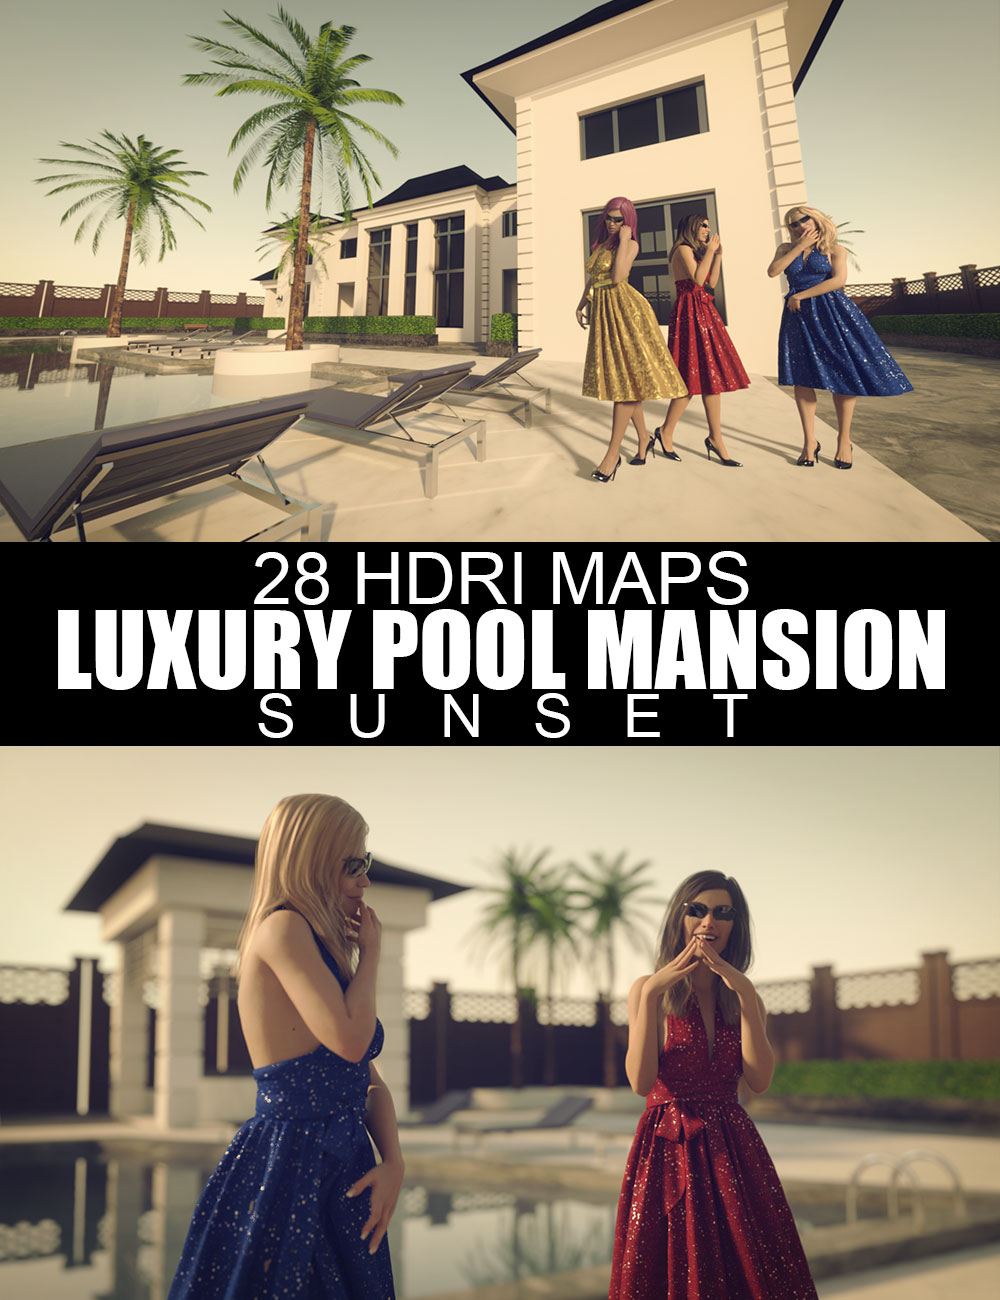 28 HDRIs - Luxury Pool Mansion Sunset by: Dreamlight, 3D Models by Daz 3D